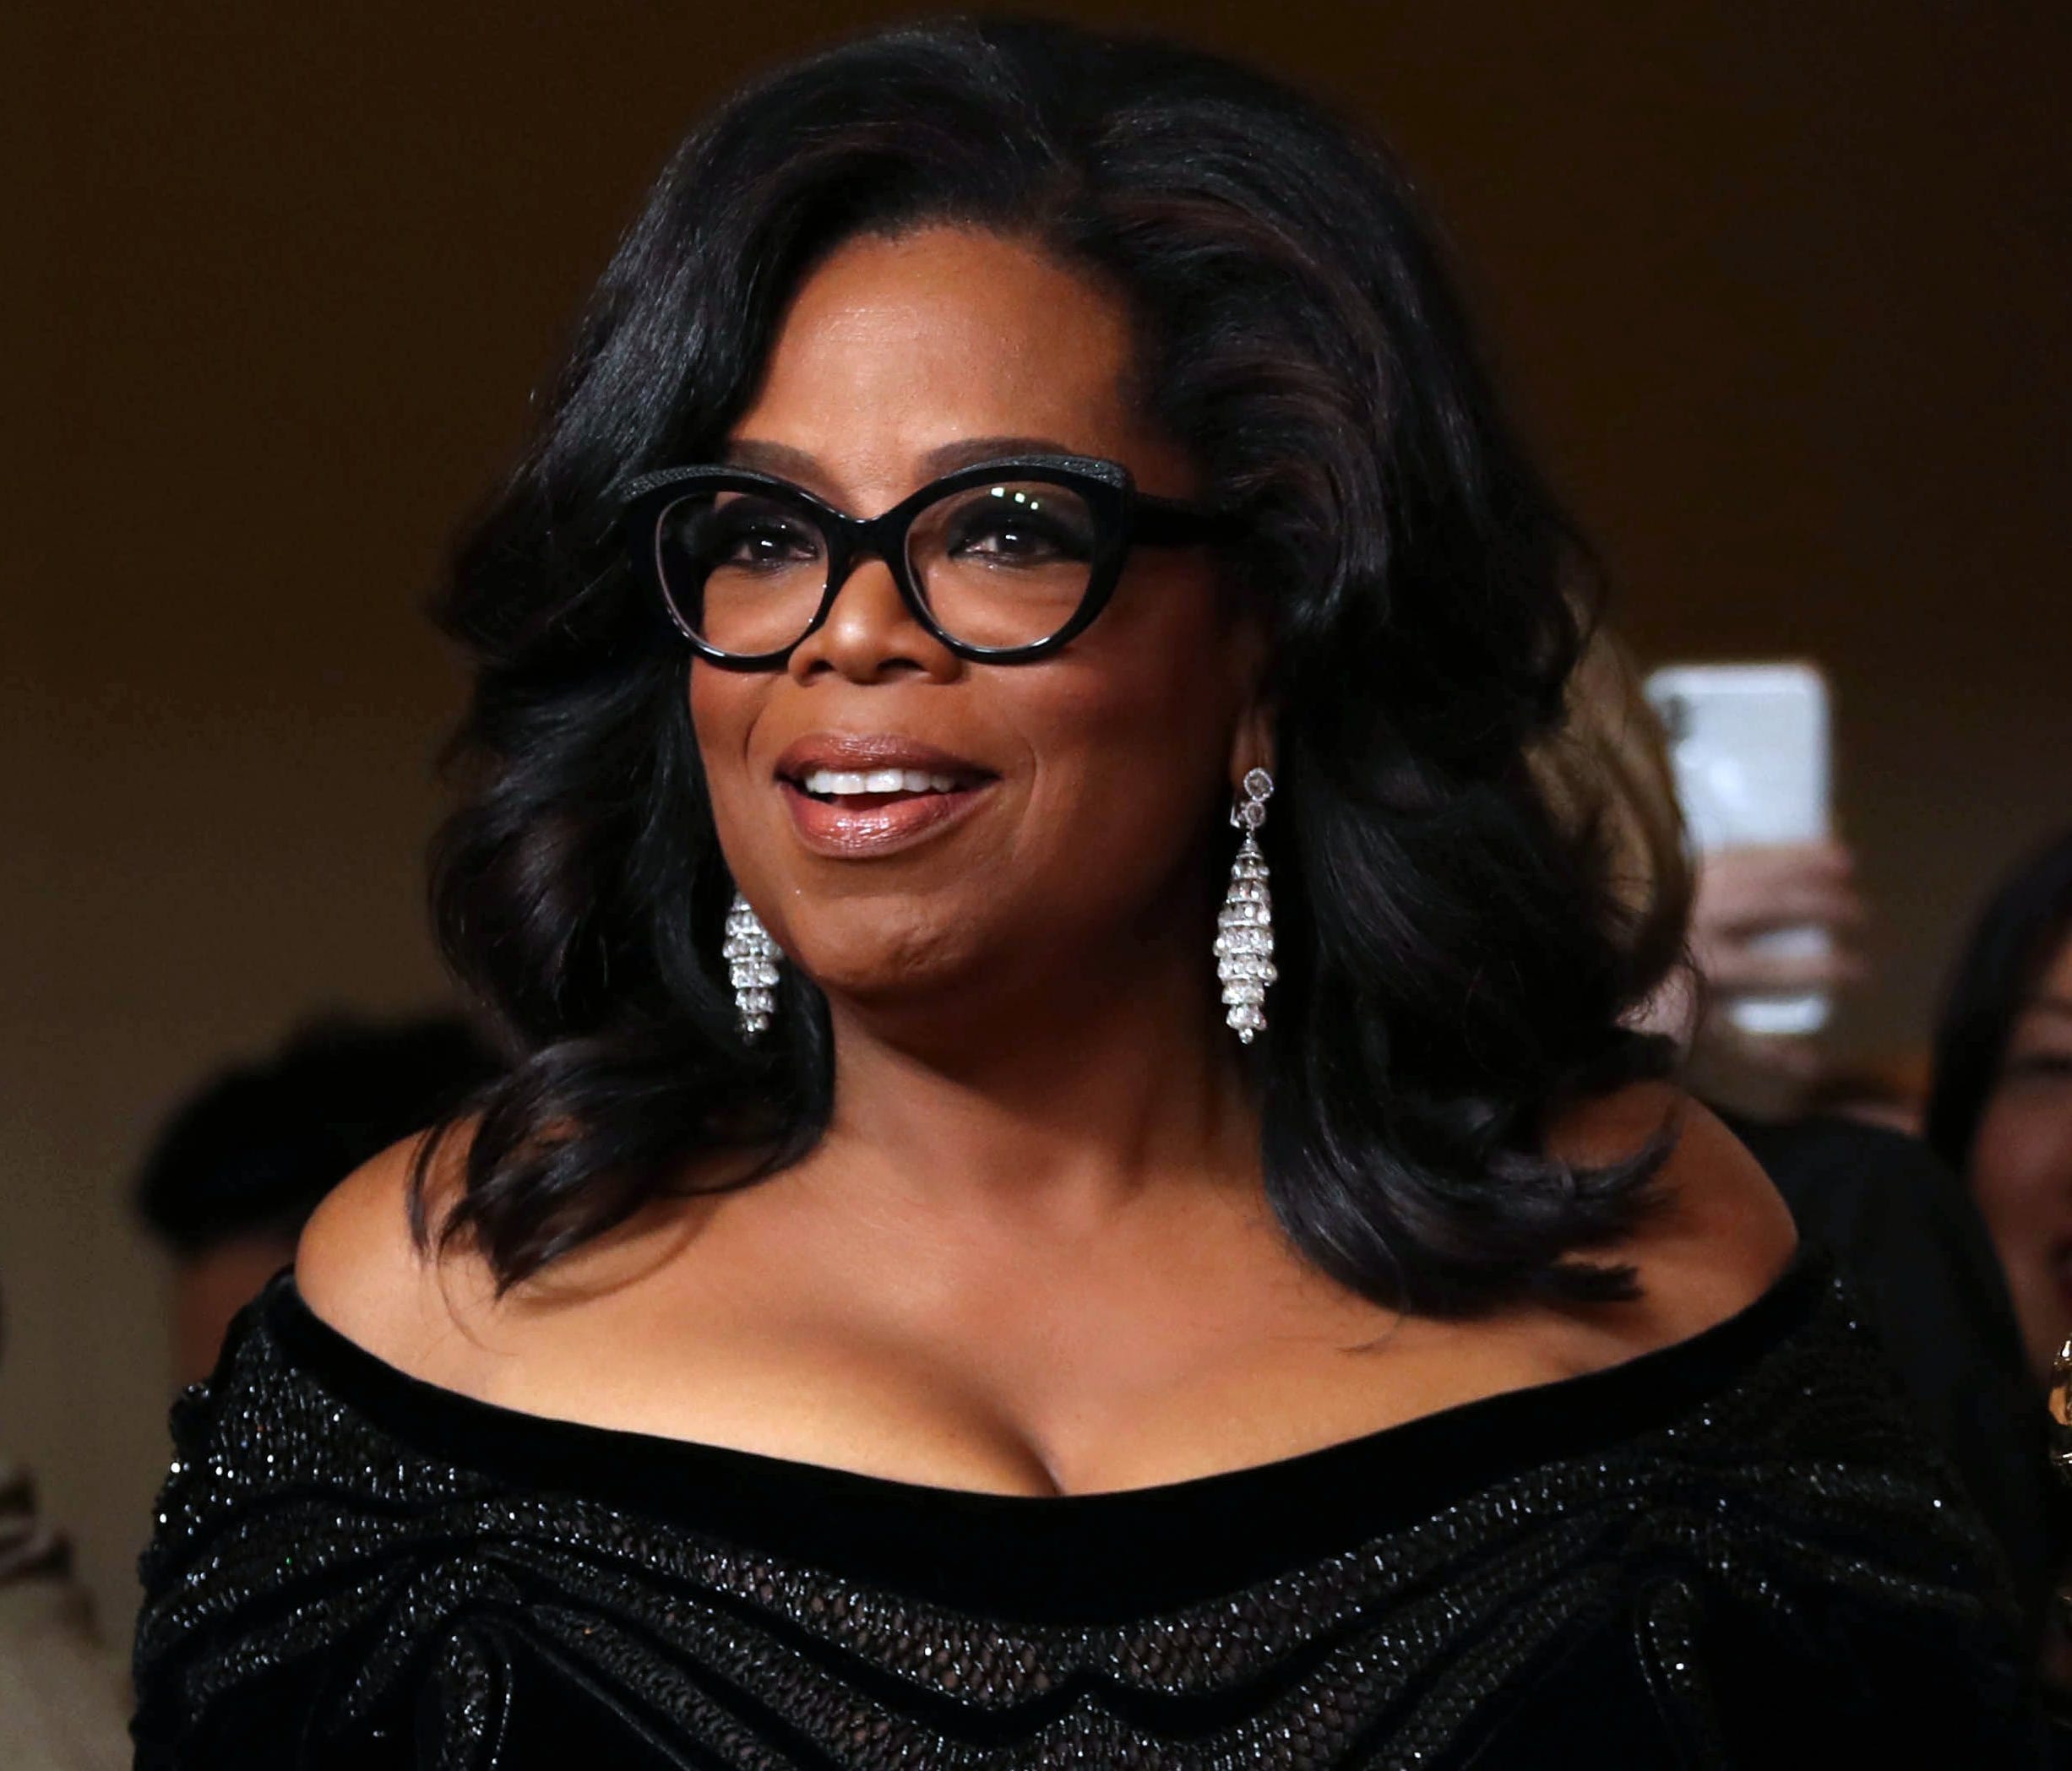 epa06424209 Oprah Winfrey holds the 2018 Golden Globe Cecil B. DeMille Award in the press room during the 75th annual Golden Globe Awards ceremony at the Beverly Hilton Hotel in Beverly Hills, California, USA, 07 January 2018.  EPA-EFE/MIKE NELSON OR